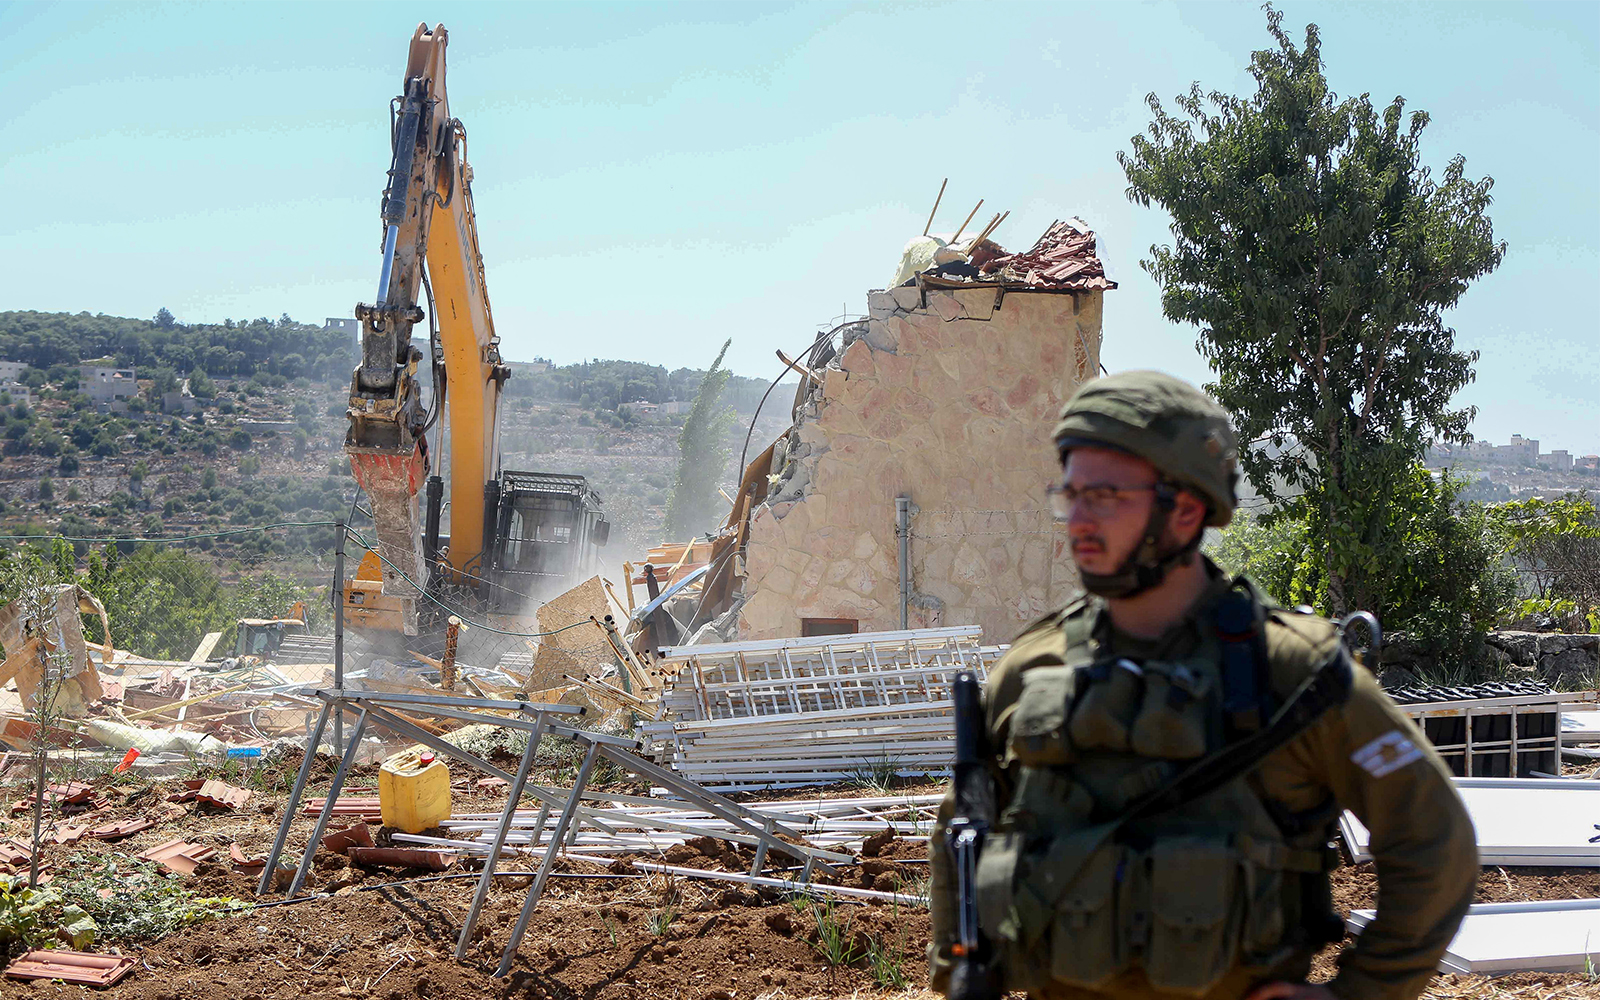 Unlawful demolitions in the West Bank spike during COVID-19: UN